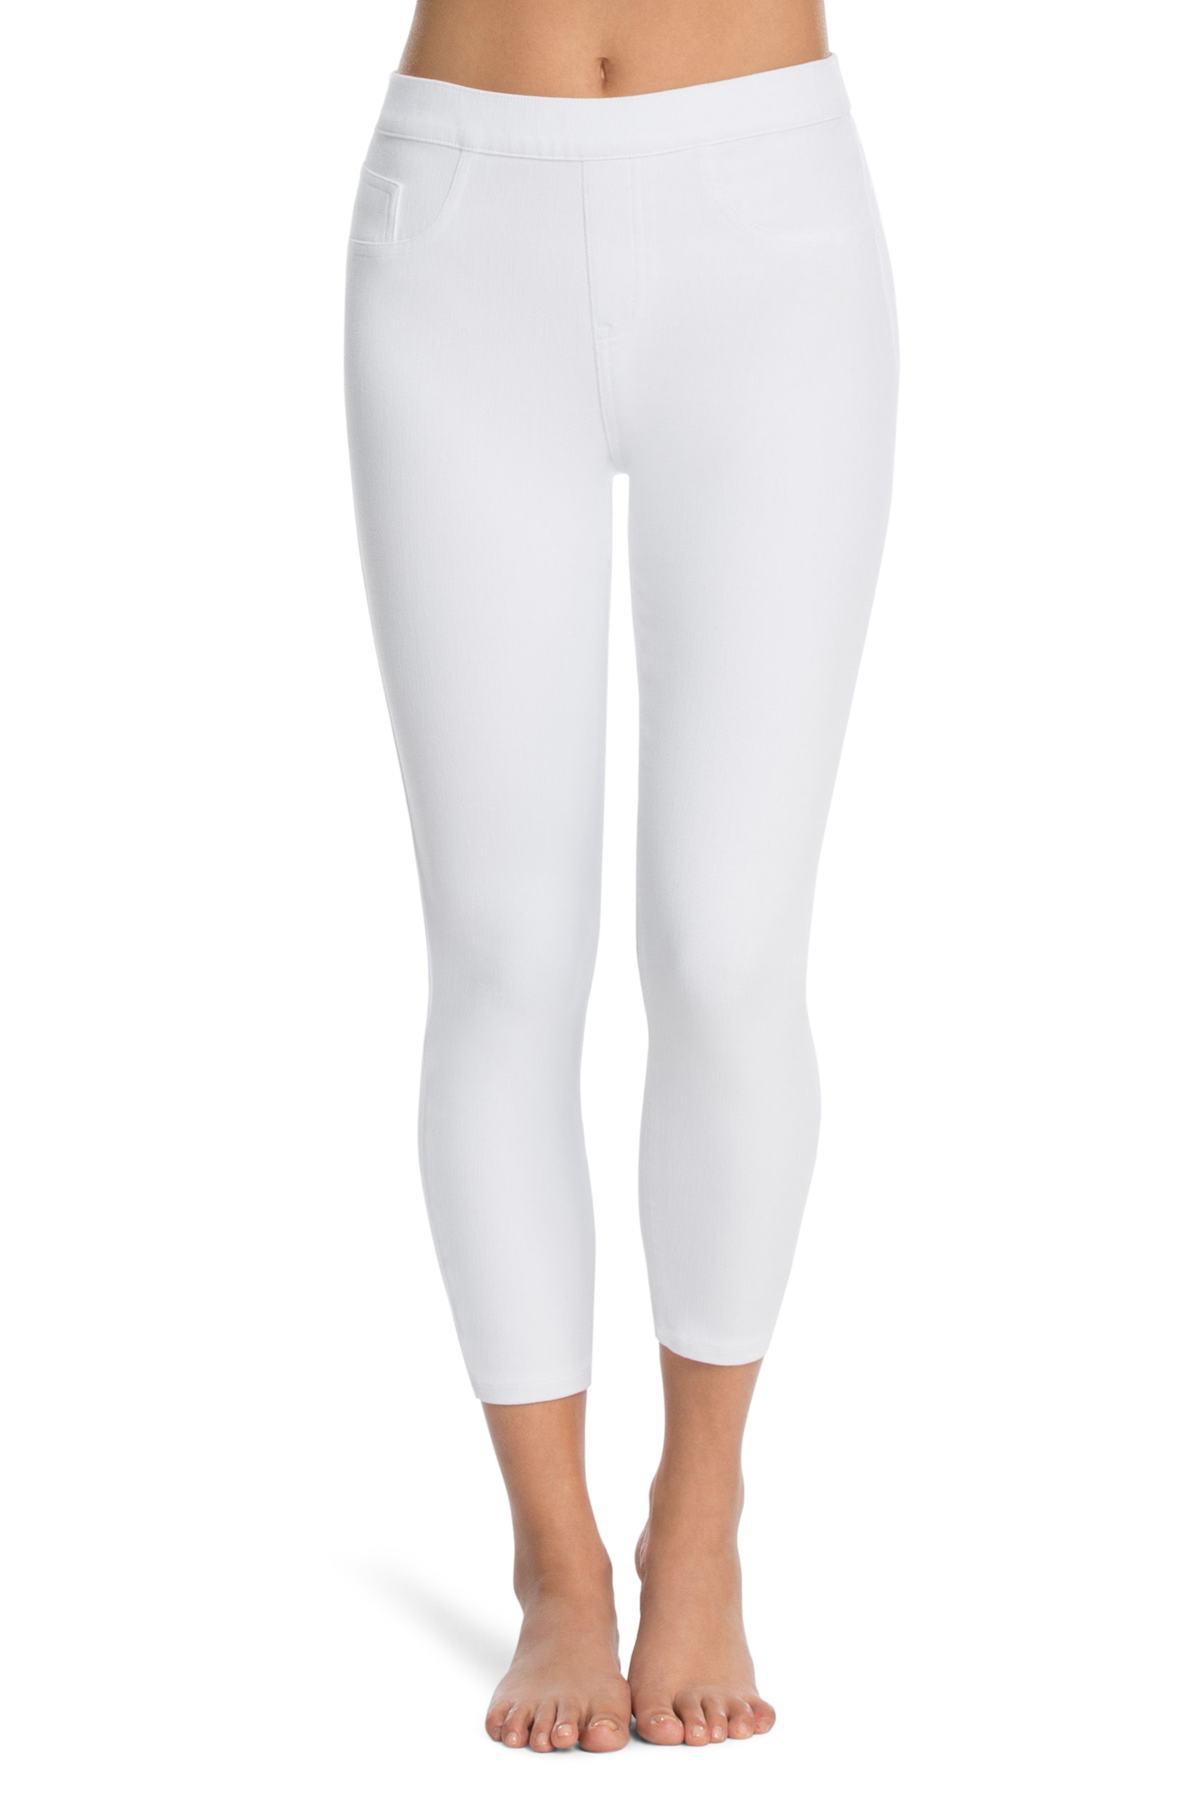 Spanx Jeanish White Leggings  International Society of Precision  Agriculture